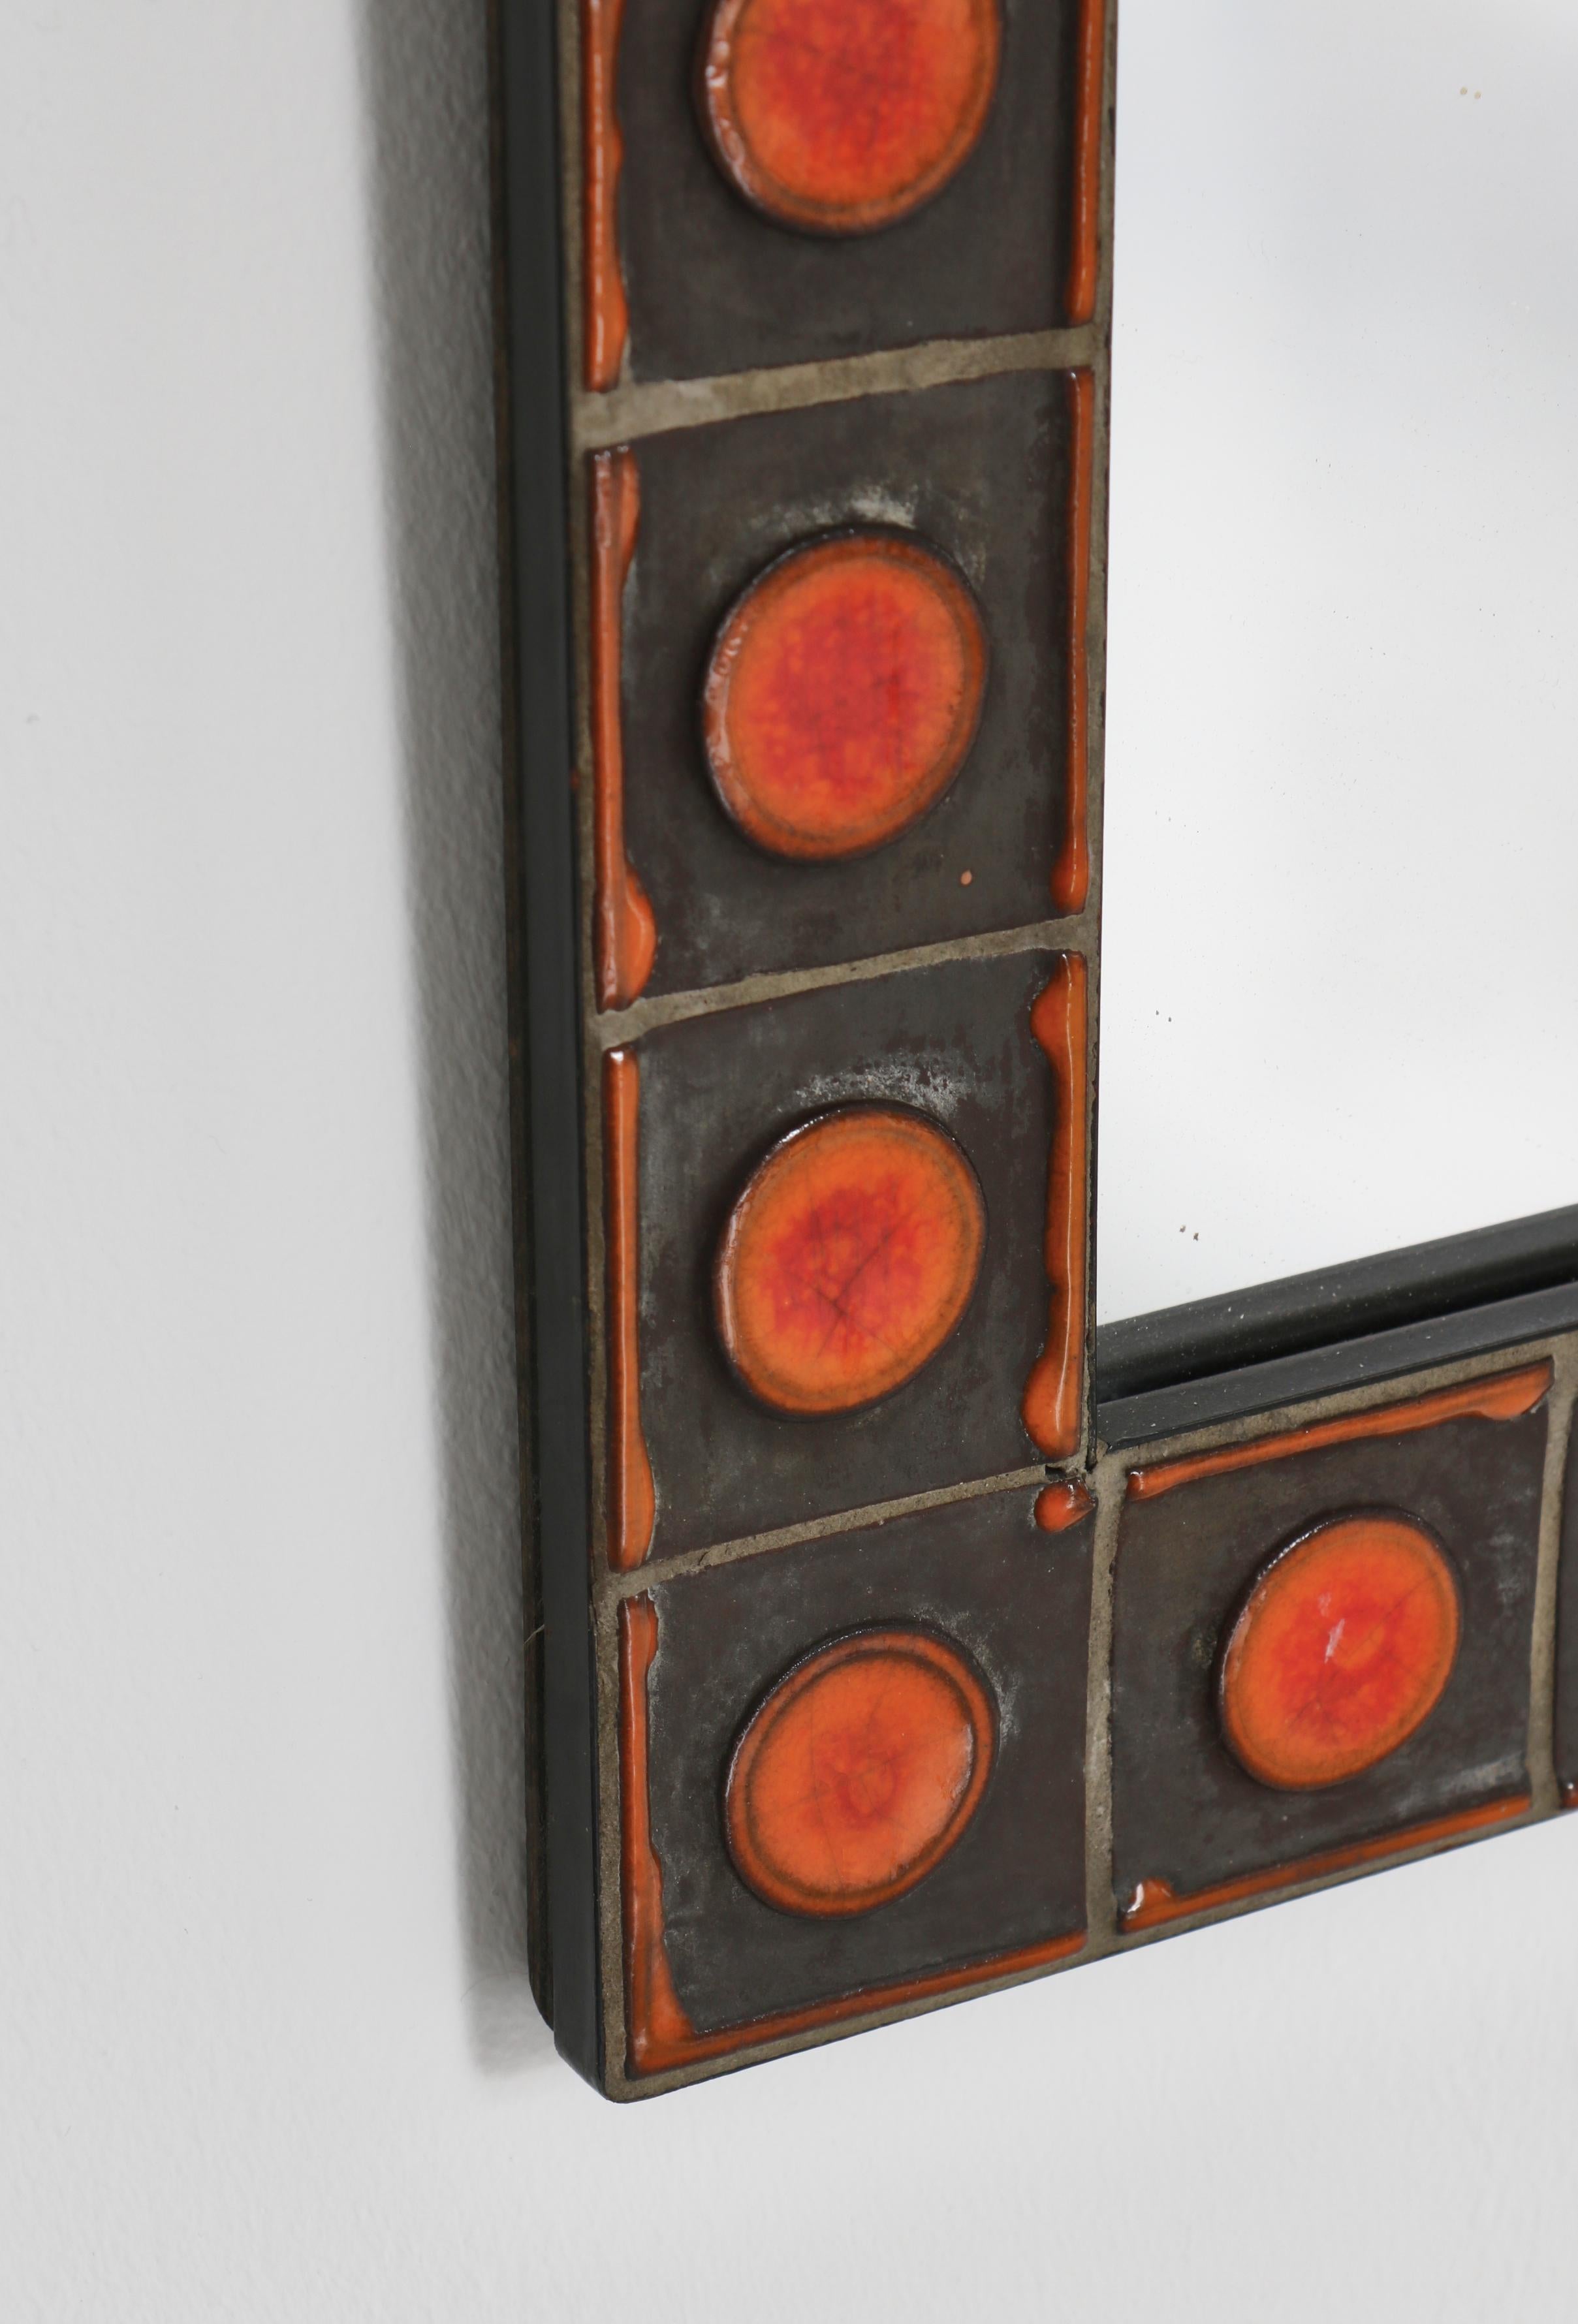 Wall Mirror Orange Ceramic Tiles by Dietlinde Hein for Knabstrup, Denmark, 1960s In Good Condition For Sale In Odense, DK